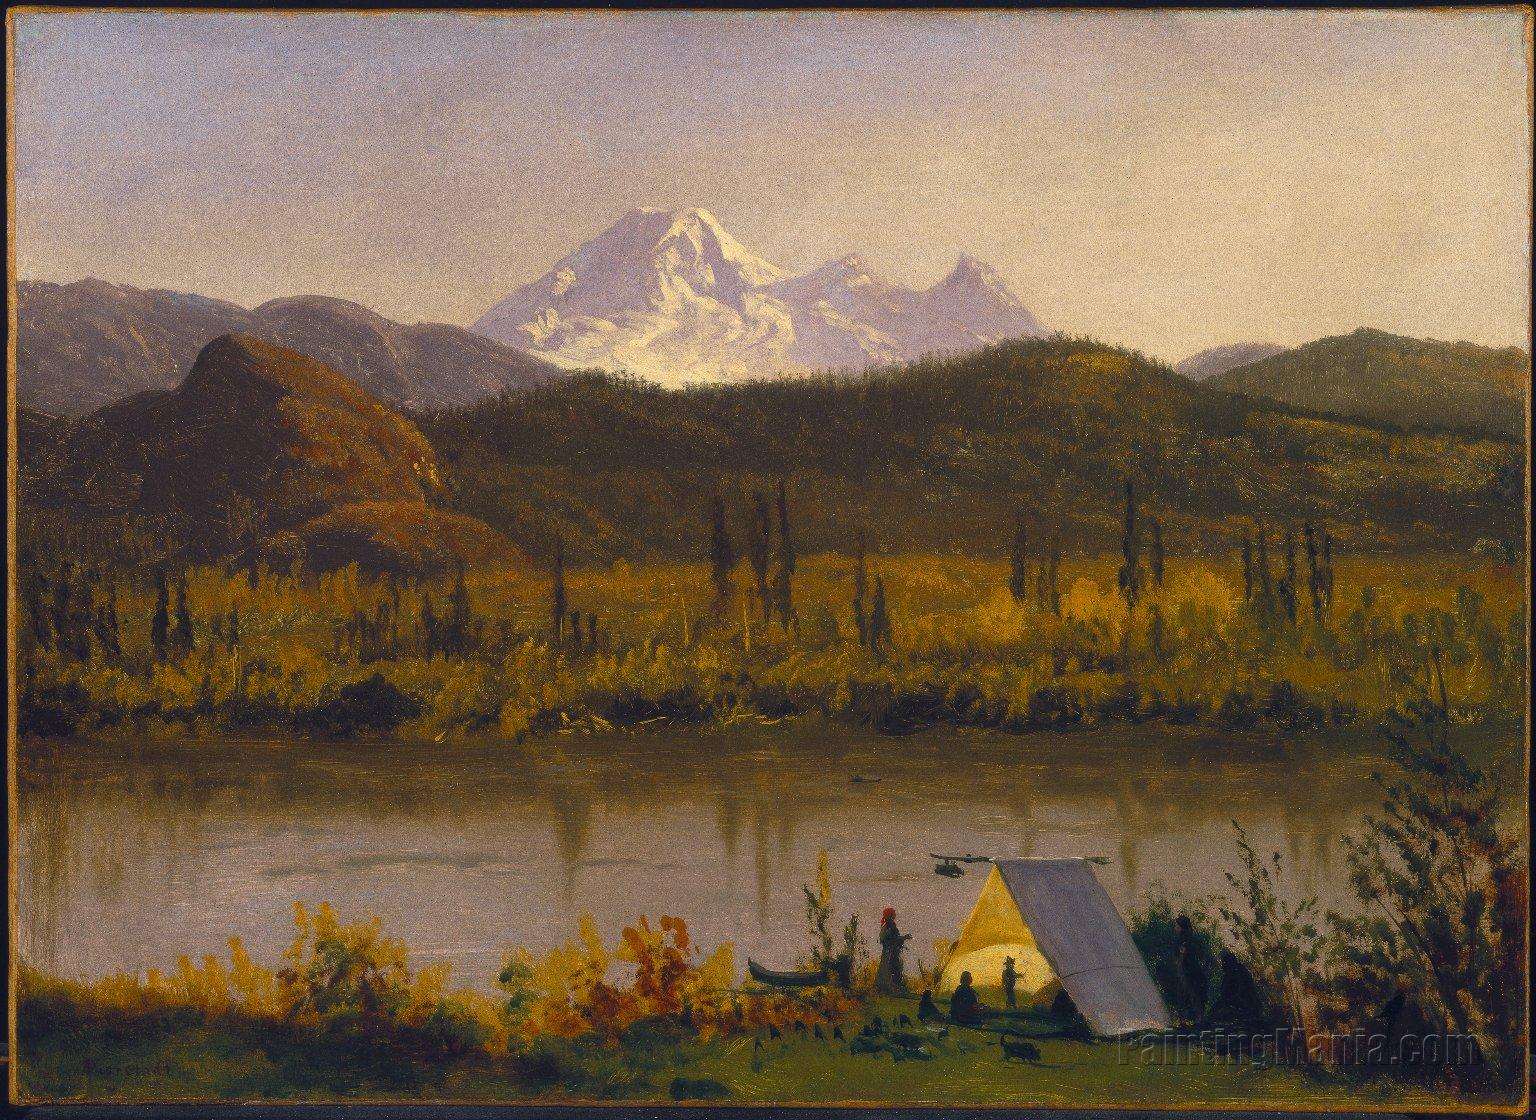 Mt. Baker, Washington, From the Frazier River